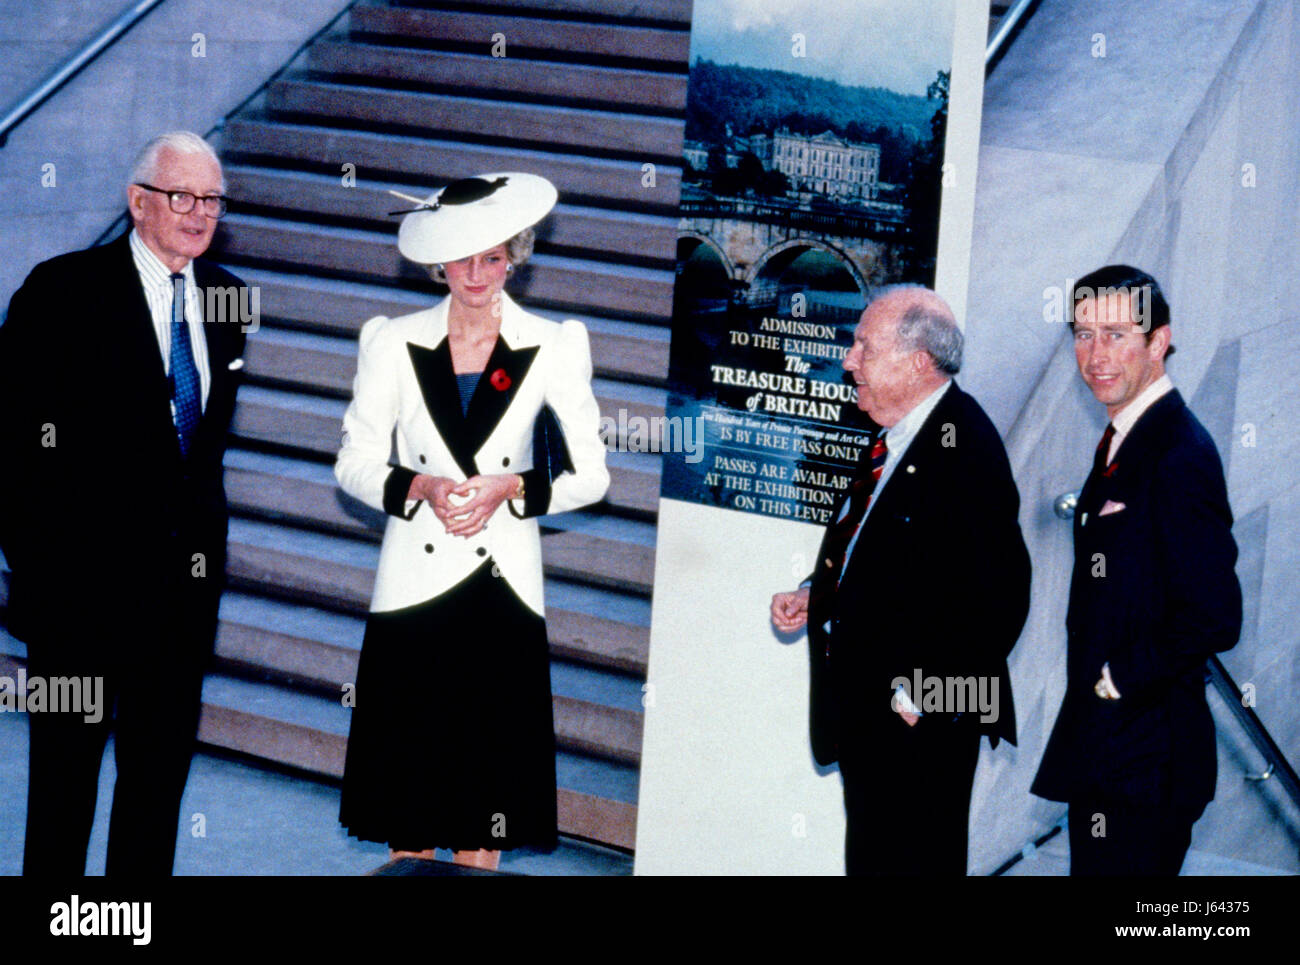 After signing the guest book of the National Gallery of Art, the Royal couple and their escorts were asked to pose for a group photo prior to touring the exhibit 'The Treasure Houses of Britain: 500 Years of Private Patronage and Art Collecting' at the National Gallery of Art in Washington, DC on November 11, 1985. From left to right: John Stevenson, President of the National Gallery of Art; Princess Diana; Dr. Franklin Murphy, Board Chairman of the National Gallery of Art; and Prince Charles. Credit: Peter Heimsath / Pool via CNP - NO WIRE SERVICE- Photo: Peter Heimsath/Consolidated News Phot Stock Photo